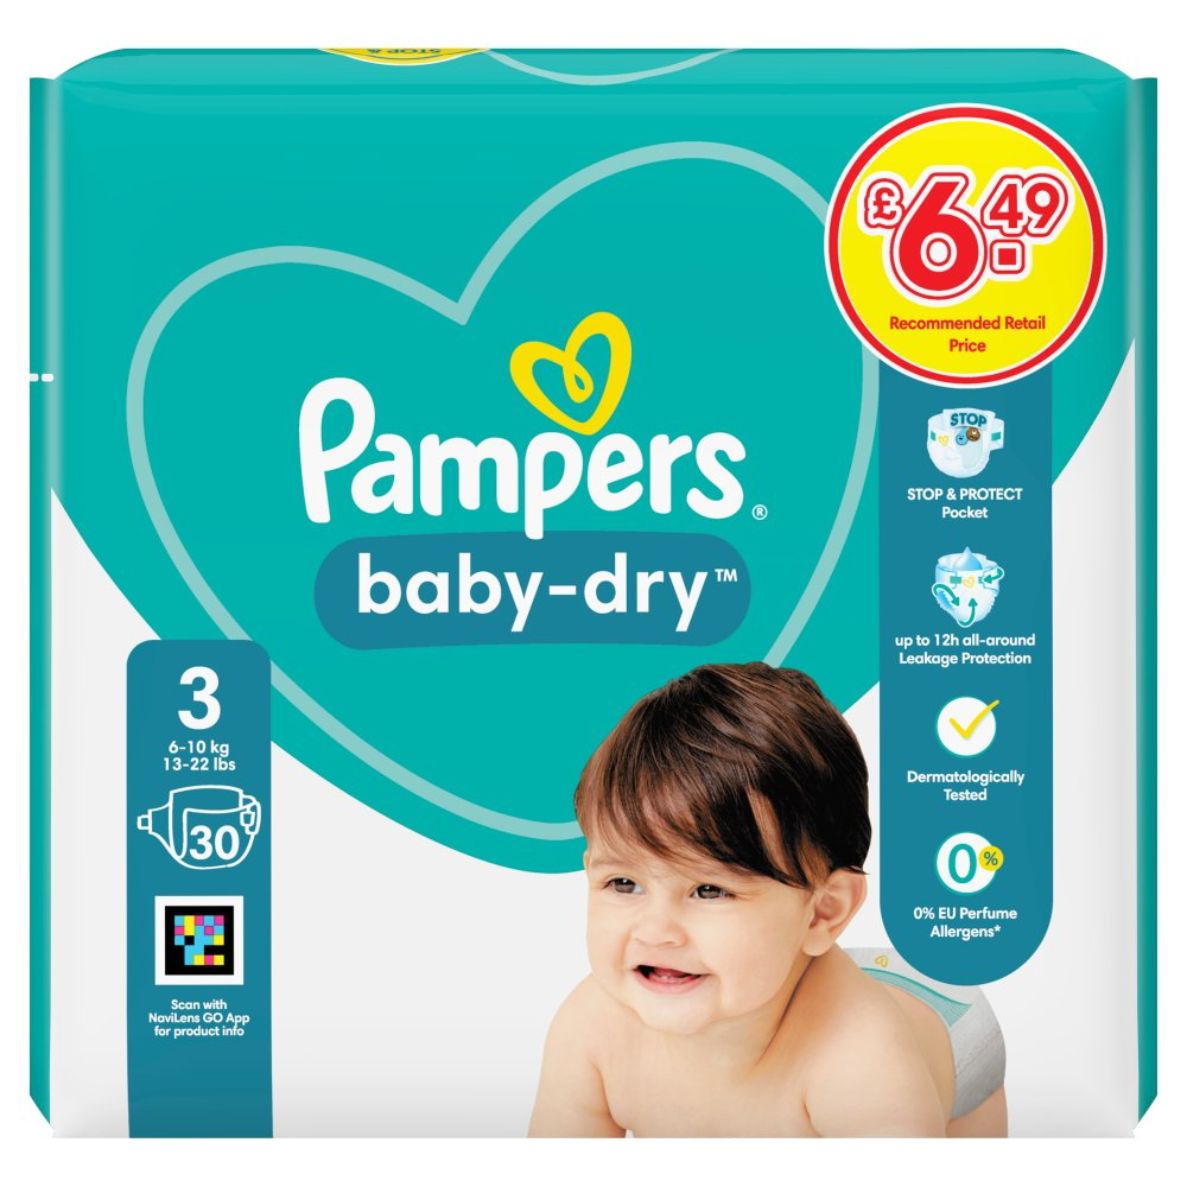 A box of Pampers - Baby Dry Size 3 - 30pcs diapers with a smiling baby on the cover, marked with a price of £6.49 and labeled for 6-10 kg weights.